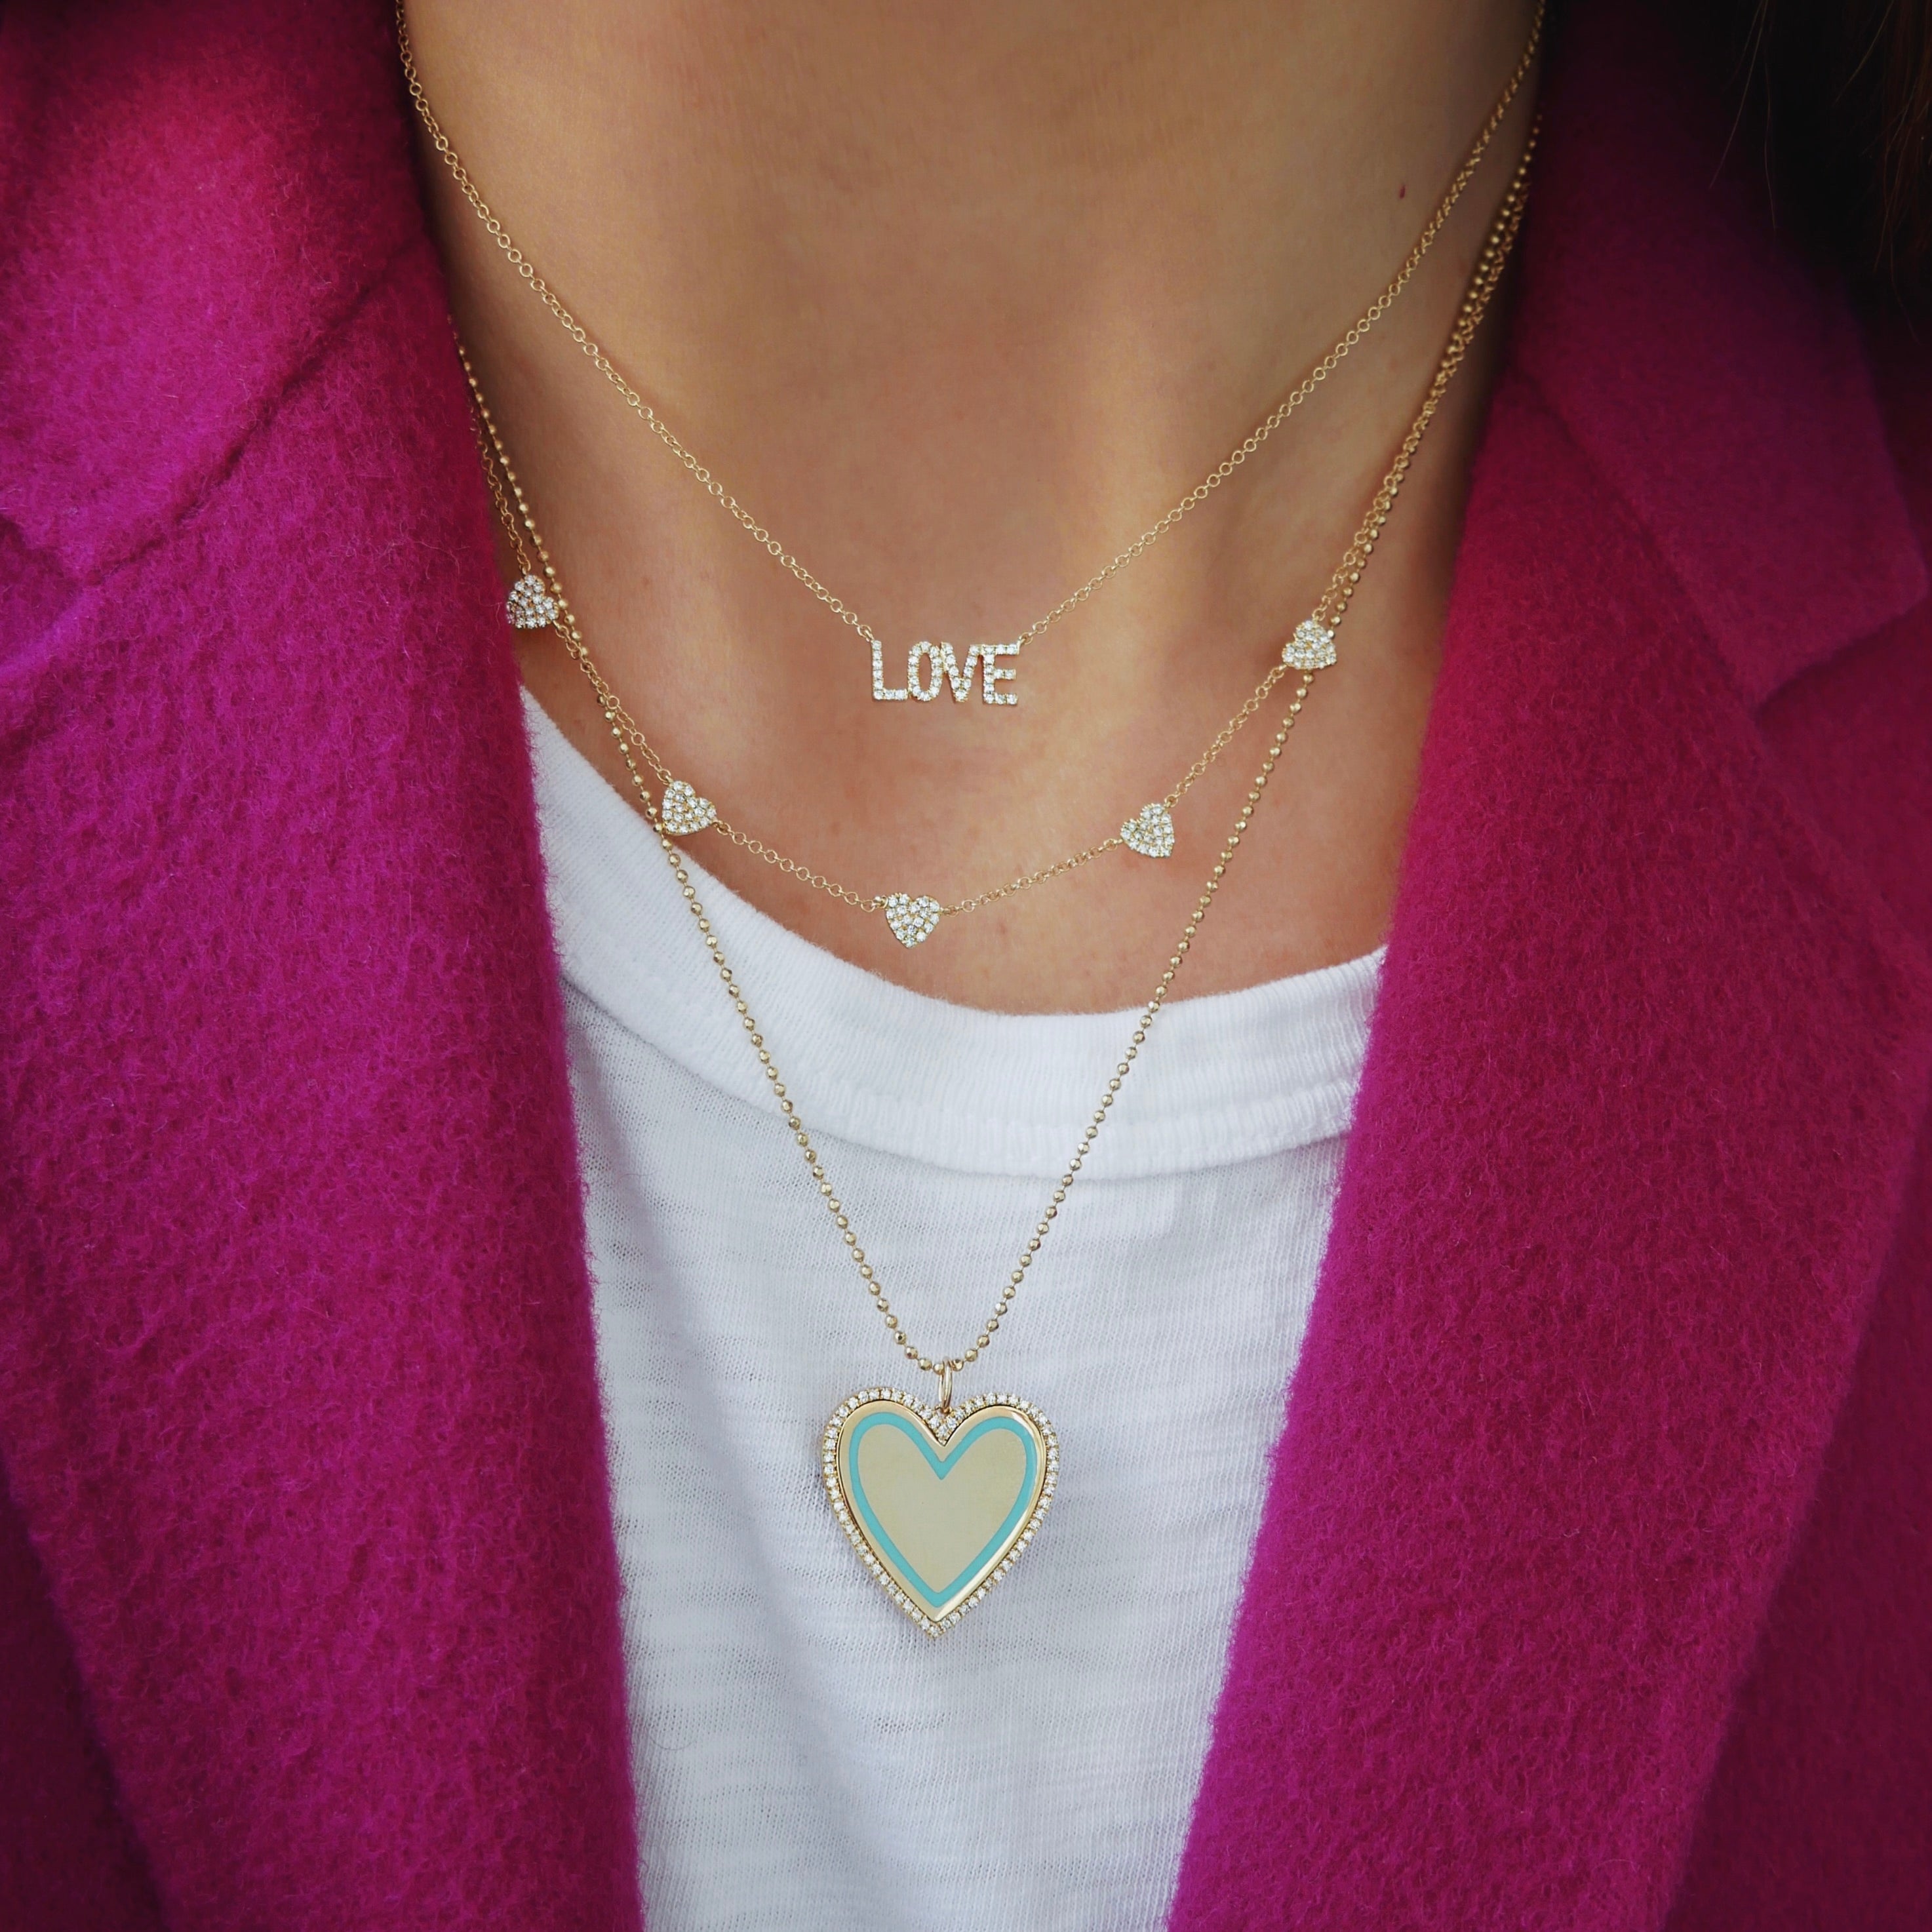 Diamond & Turquoise Enamel Heart Necklace styled on the neck in yellow gold